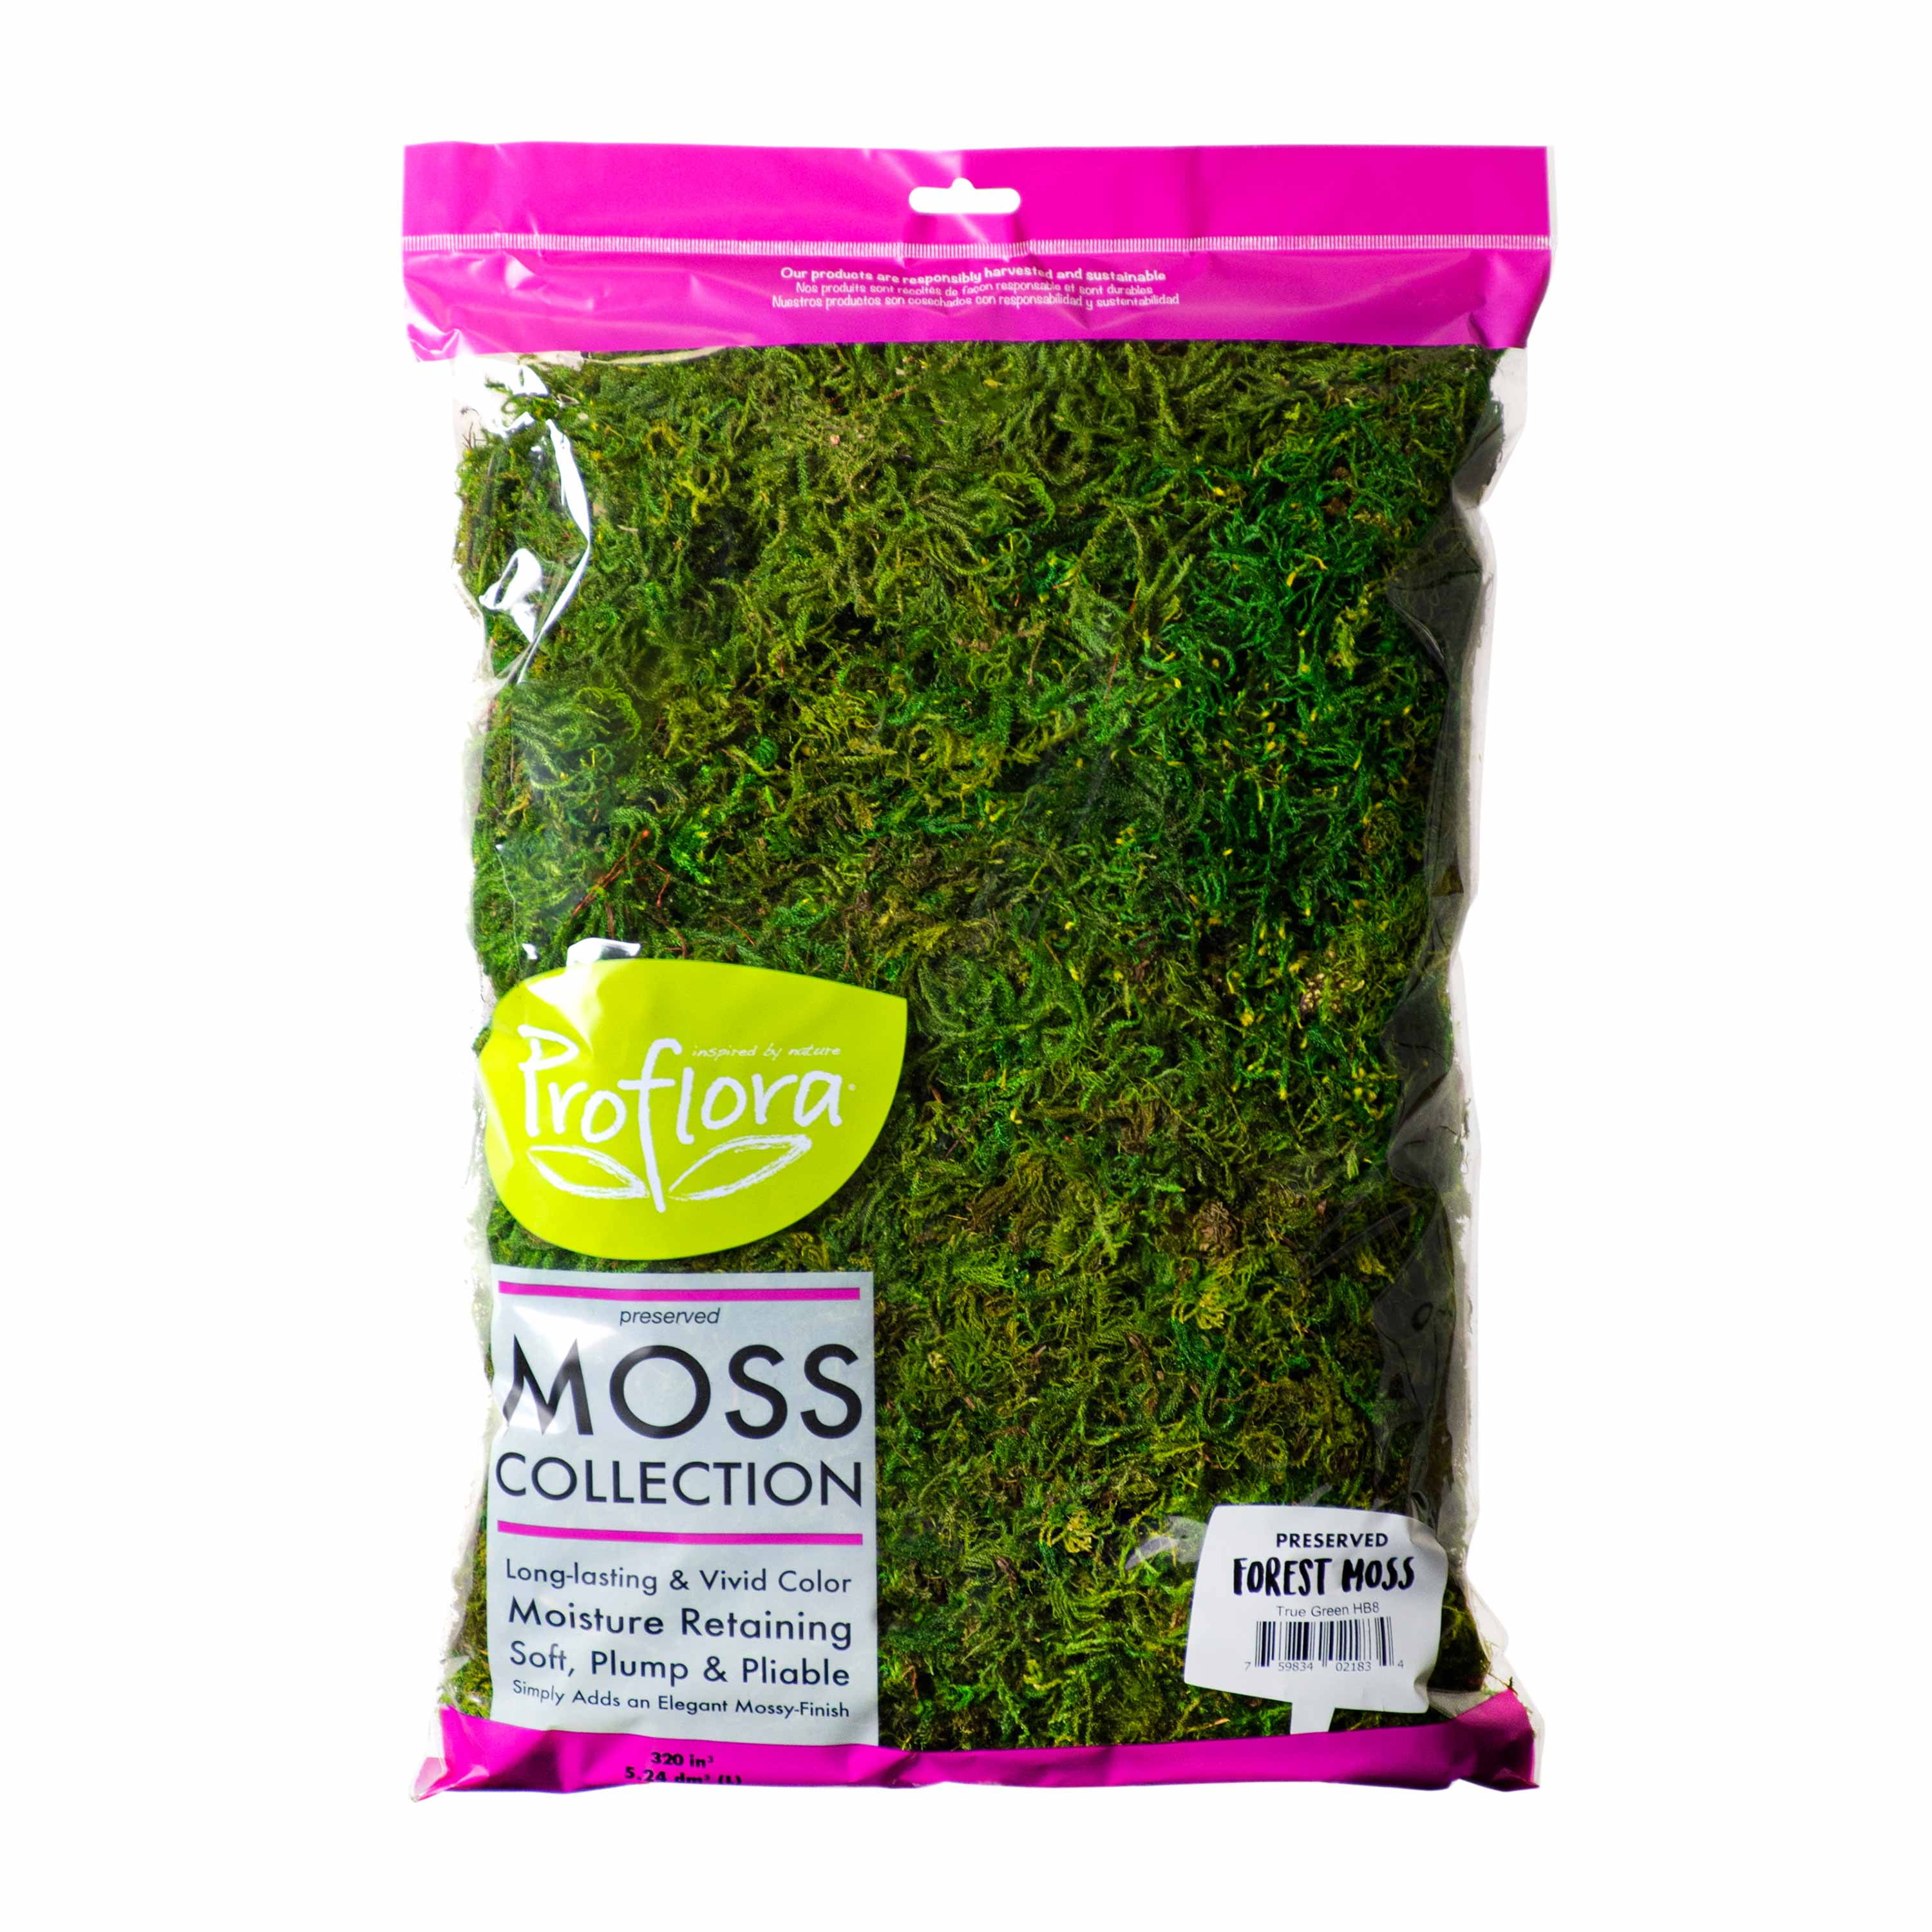 nifloral new stylish indoor decoration moss